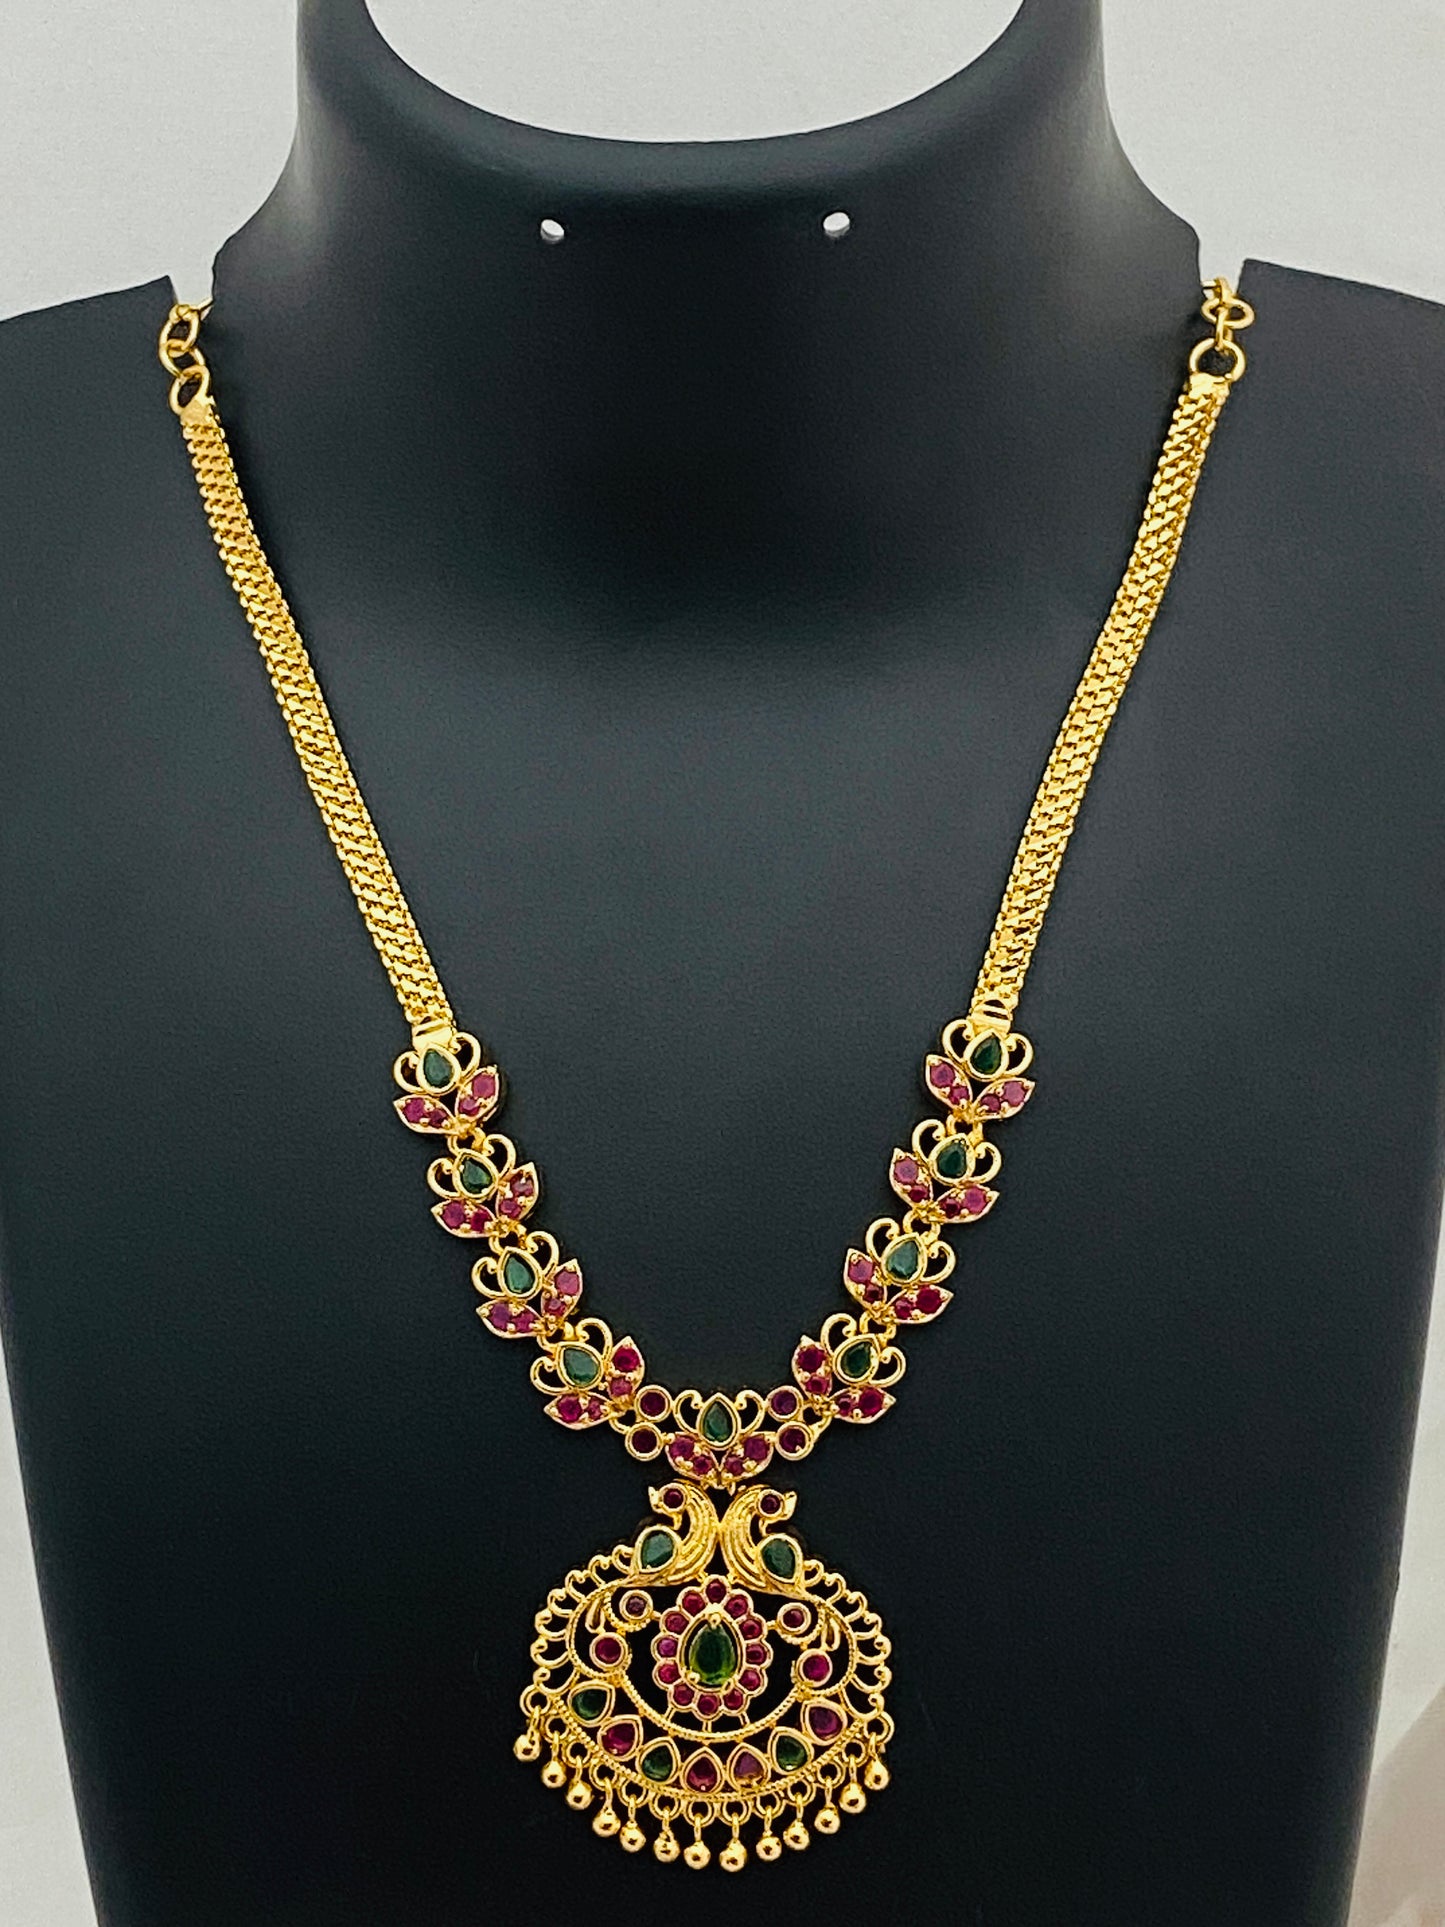 Charming Multi Color Gold Plated Peacock Pendant Necklace